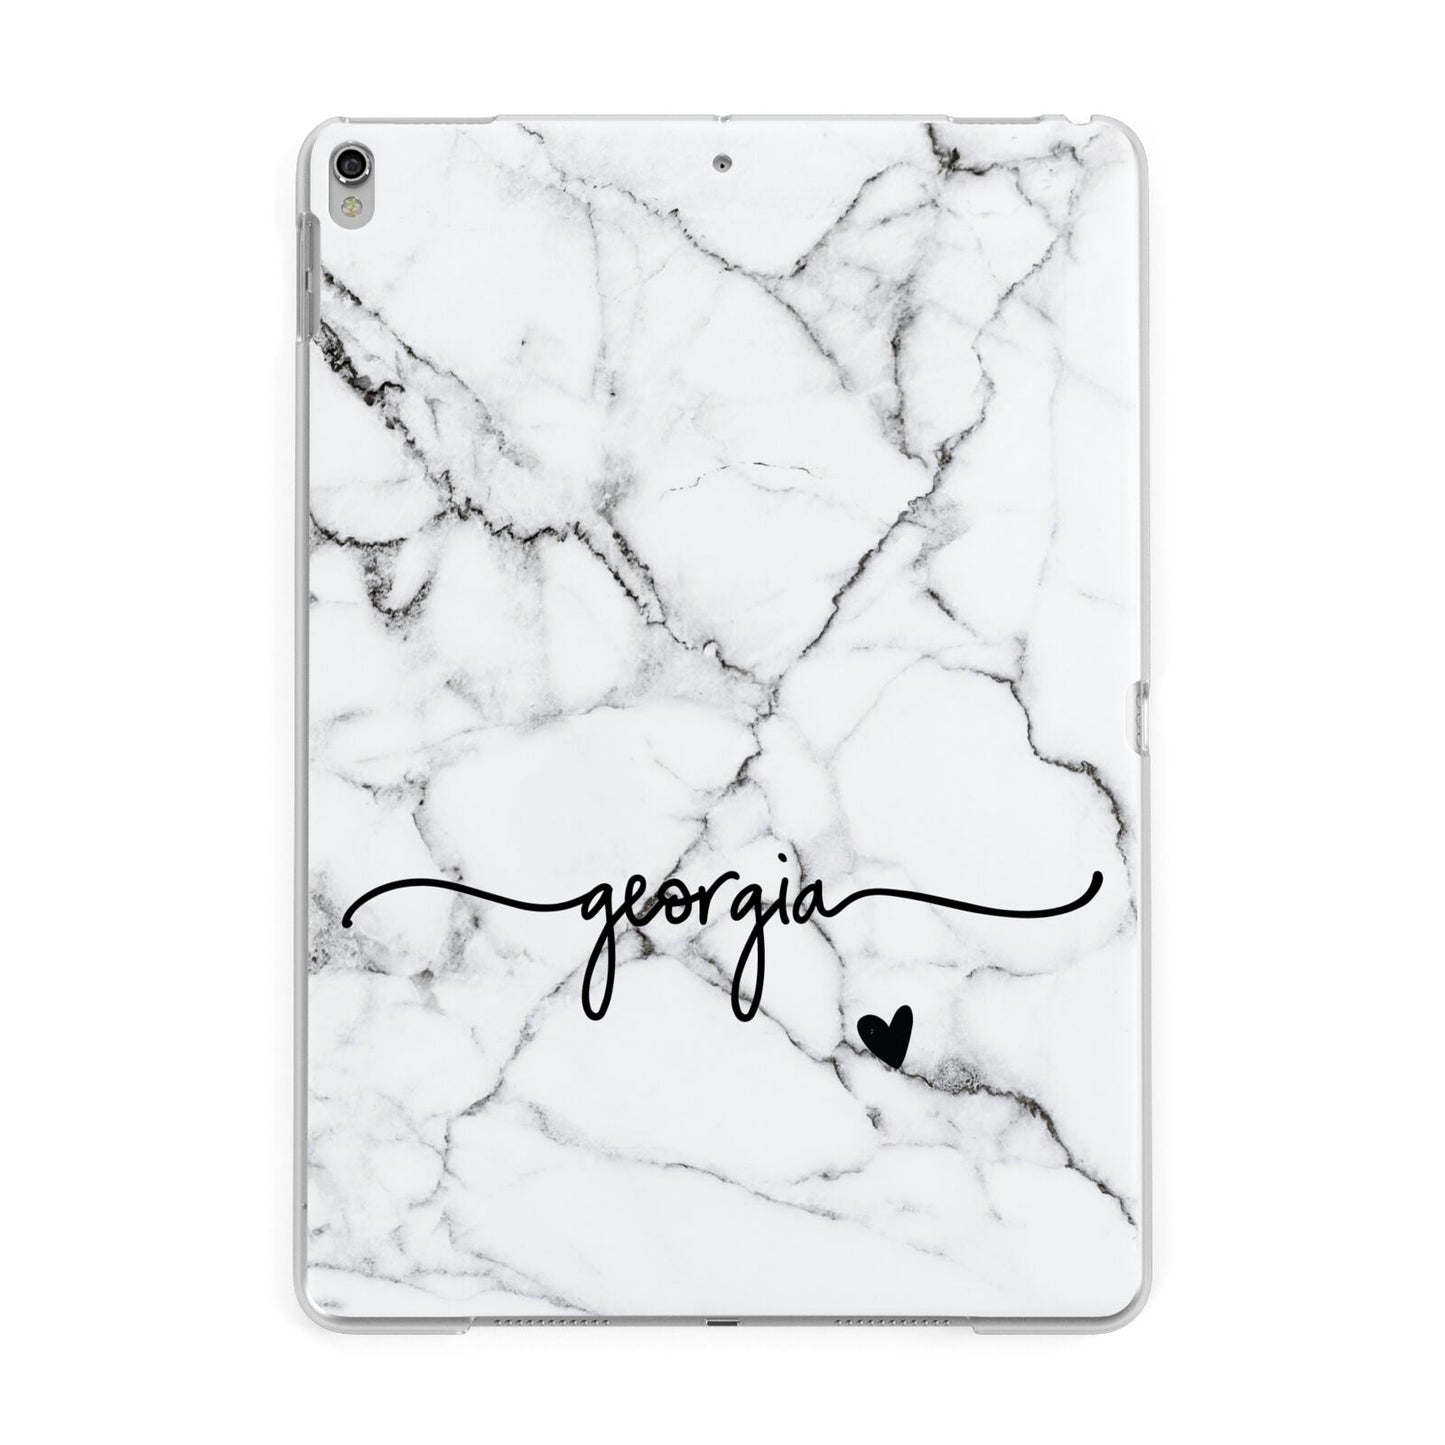 Personalised Black and White Marble with Handwriting Text Apple iPad Silver Case